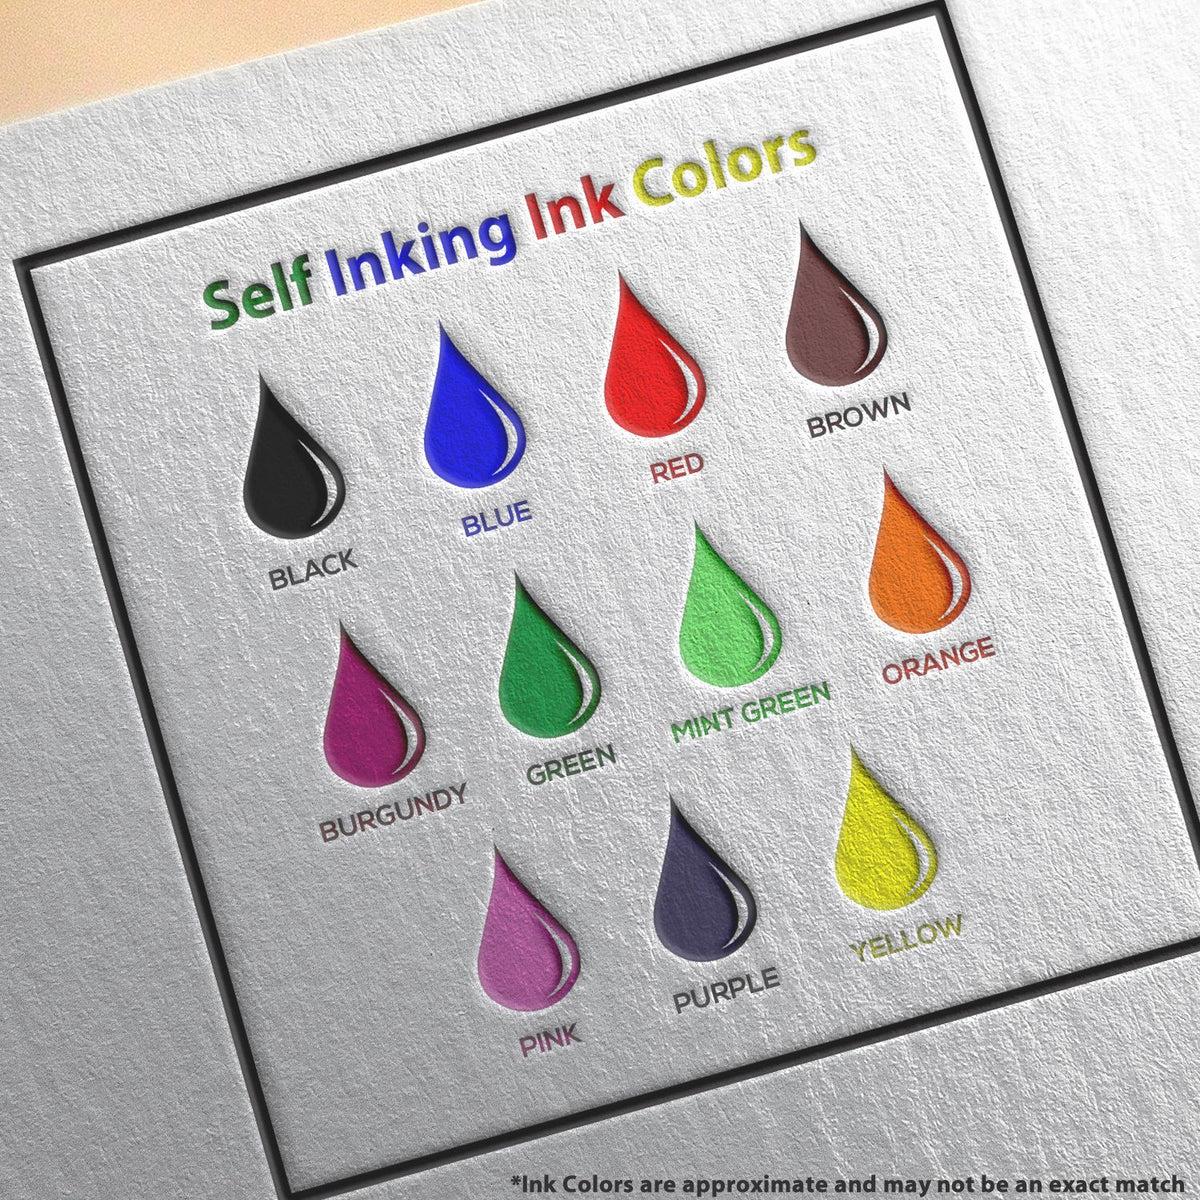 A picture showing the different ink colors or hues available for the Self-Inking Massachusetts Landscape Architect Stamp product.